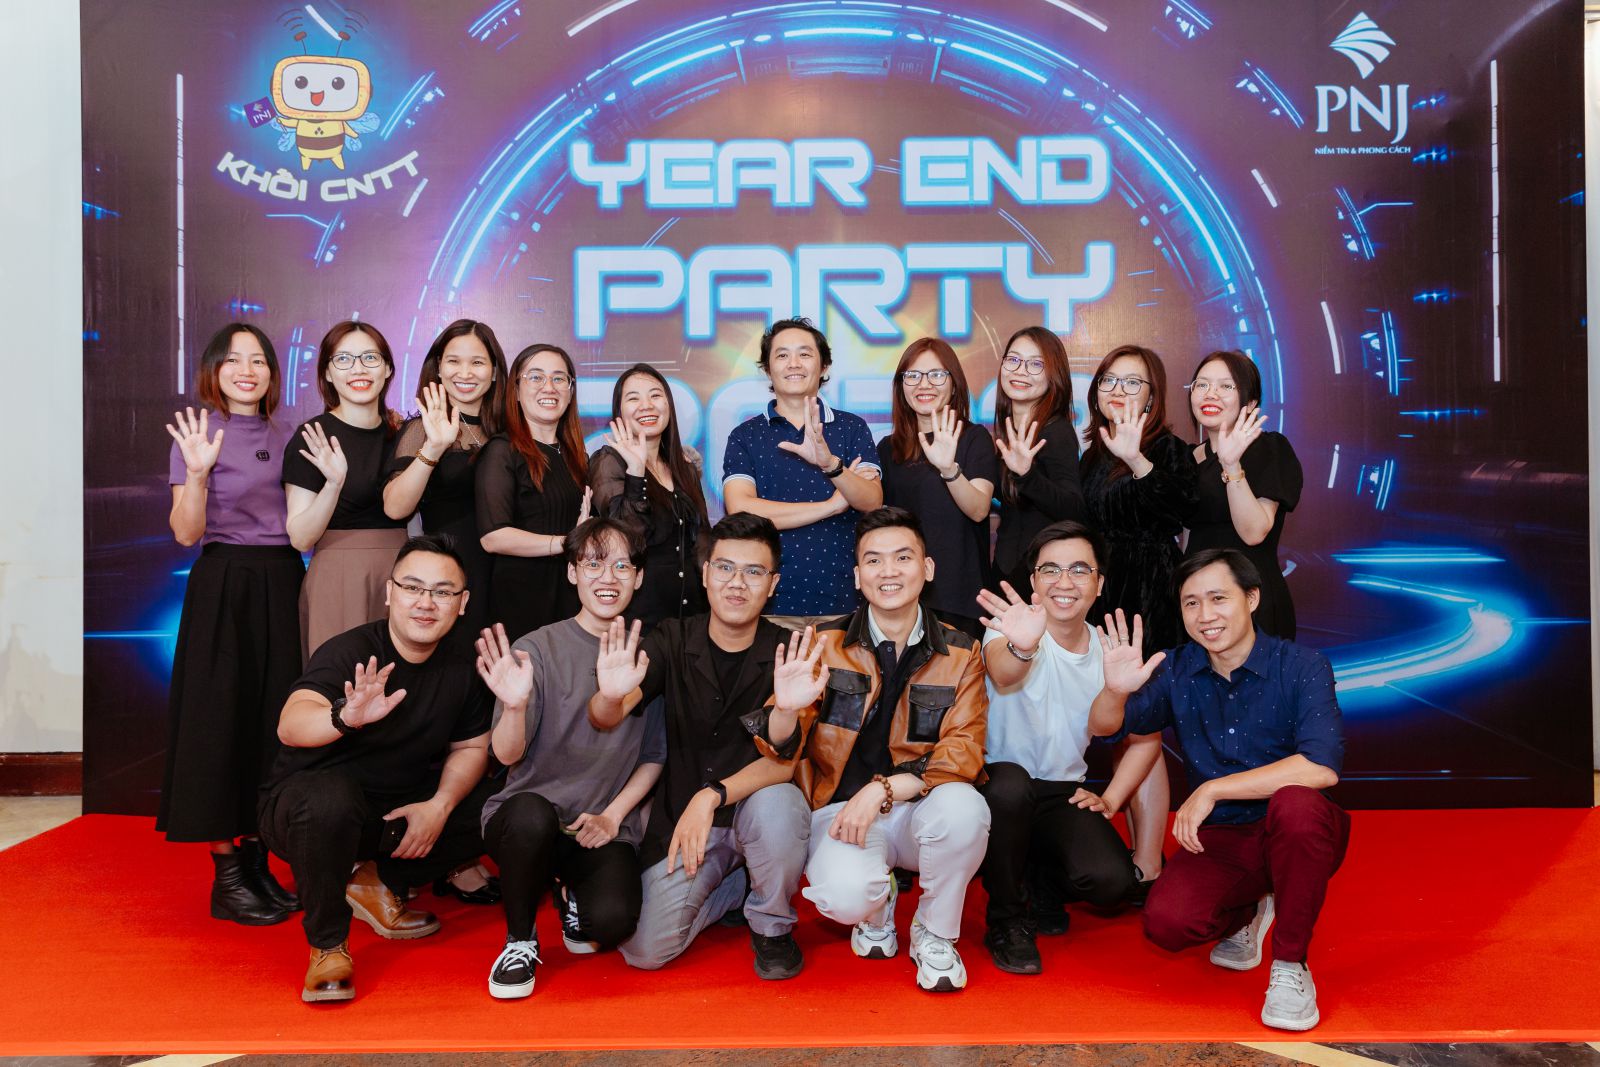 YEAR END PARTY - CÔNG TY PNJ